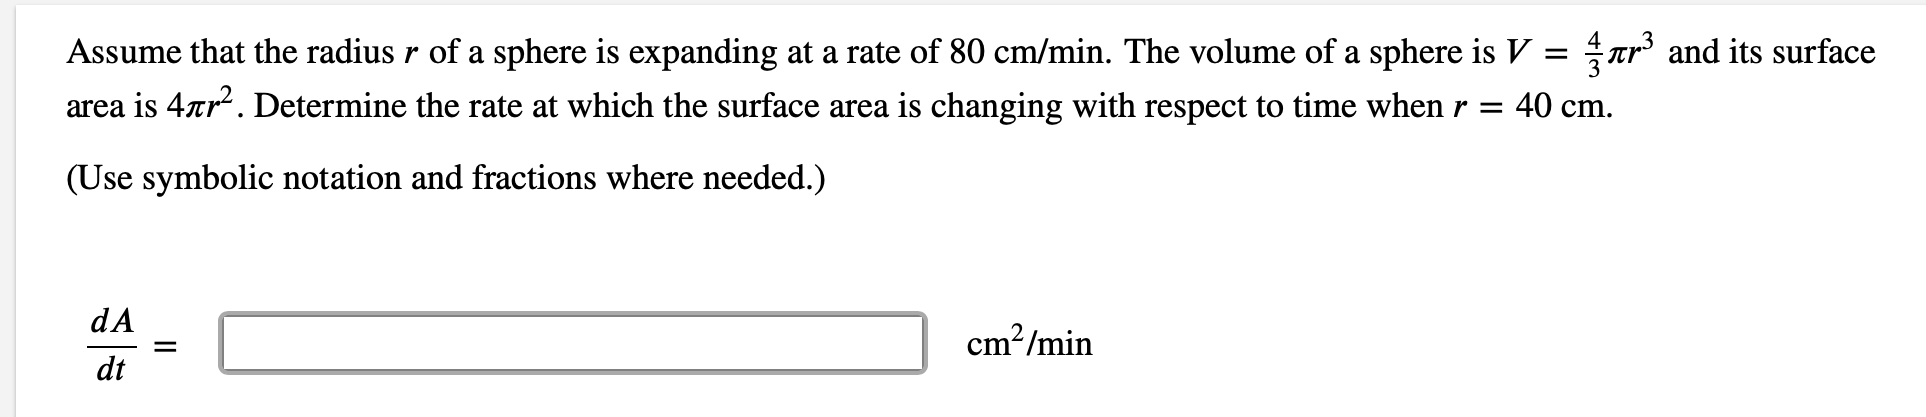 Assume that the radius r of a sphere is expanding at a rate of 80 cm/min. The volume of a sphere is V =
Tr' and its surface
area is 4ar. Determine the rate at which the surface area is changing with respect to time when r = 40 cm.
(Use symbolic notation and fractions where needed.)
dA
cm²/min
dt
